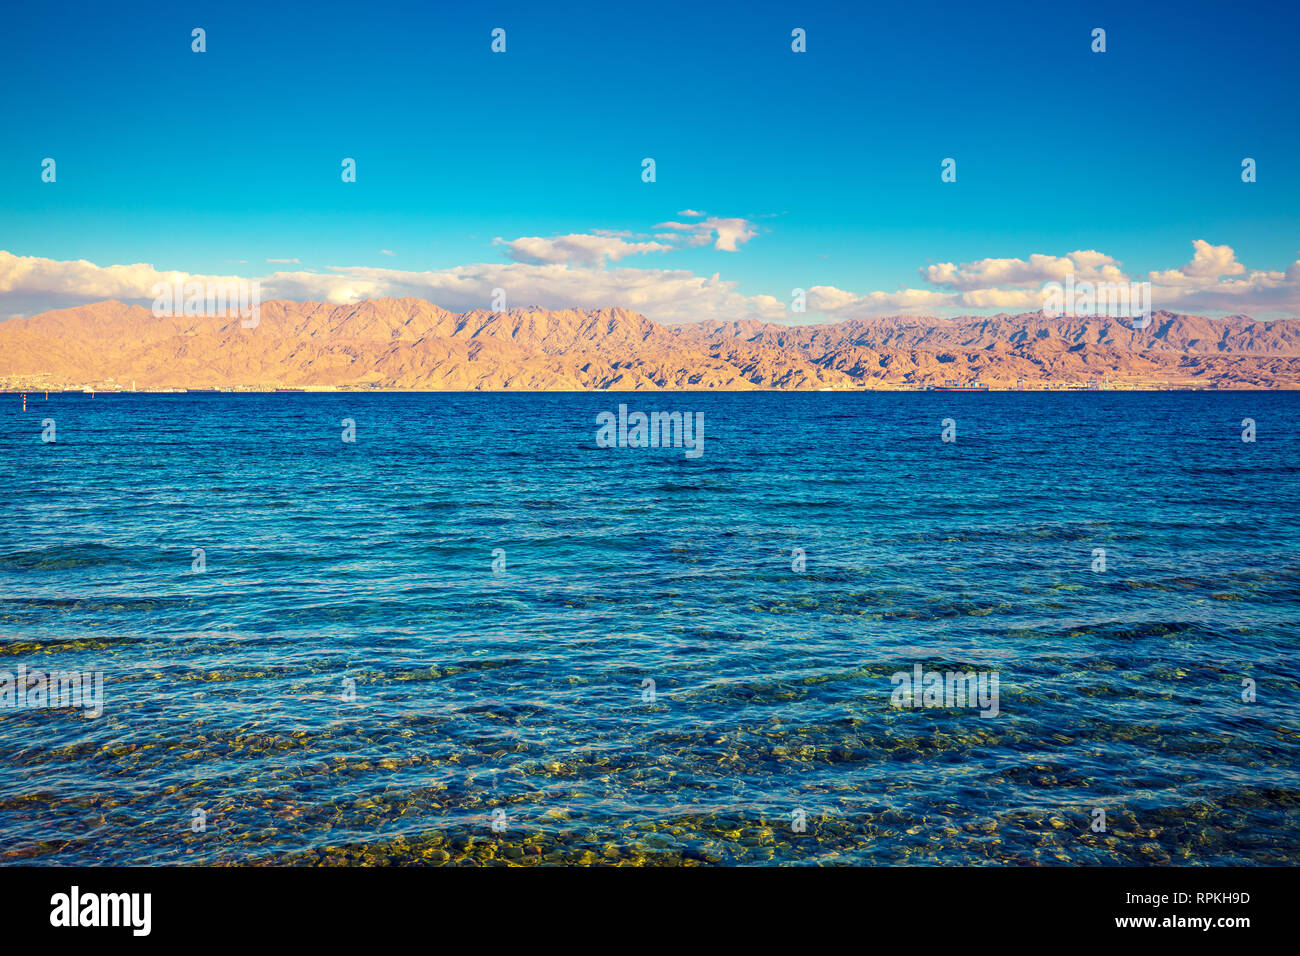 View of the Red sea and mountain. Eilat, Israel Stock Photo